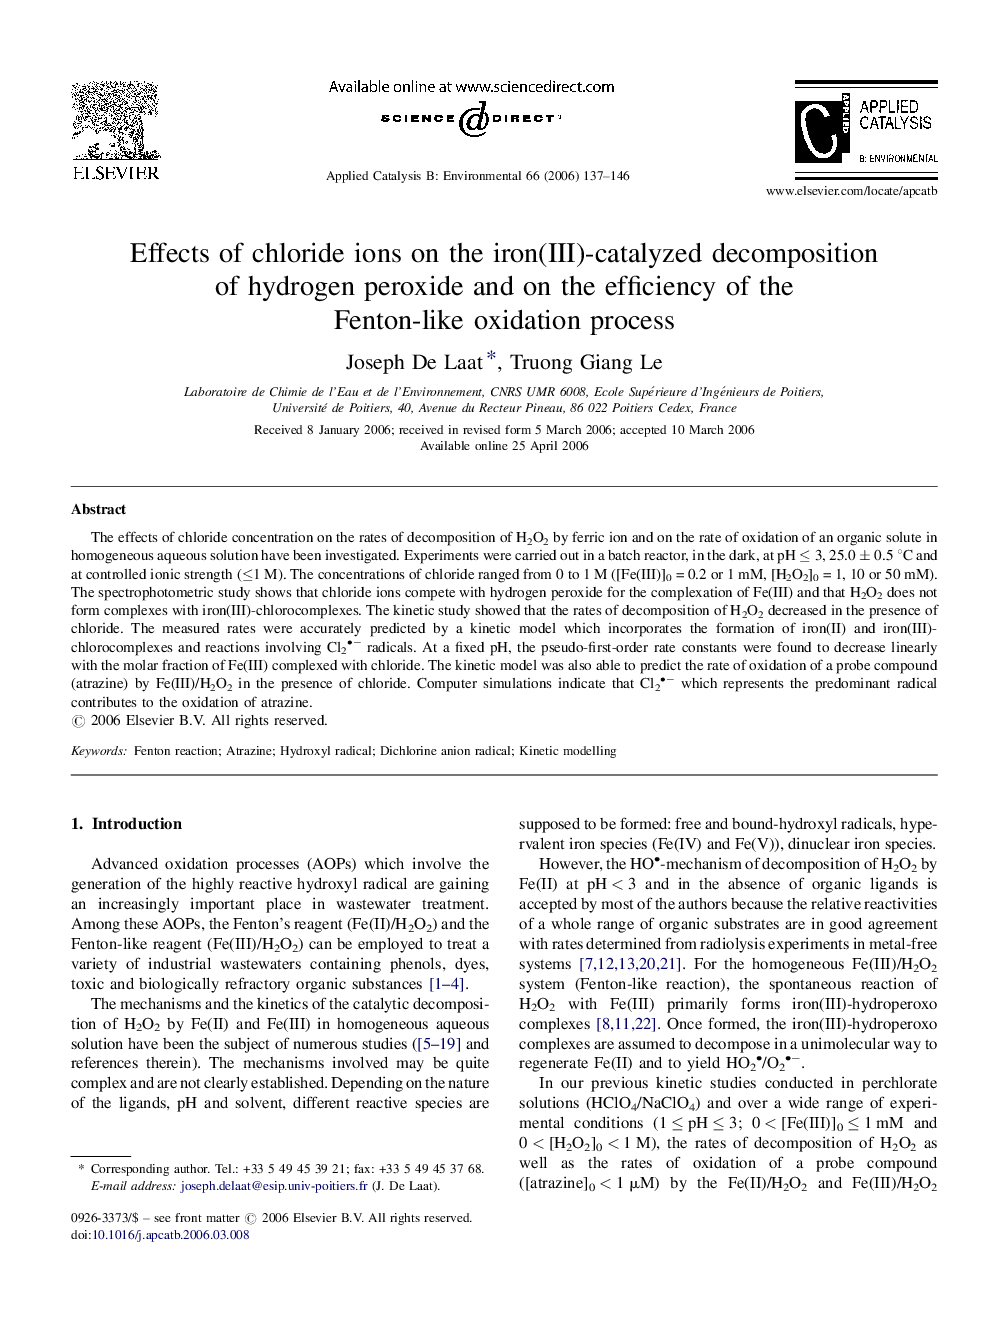 Effects of chloride ions on the iron(III)-catalyzed decomposition of hydrogen peroxide and on the efficiency of the Fenton-like oxidation process